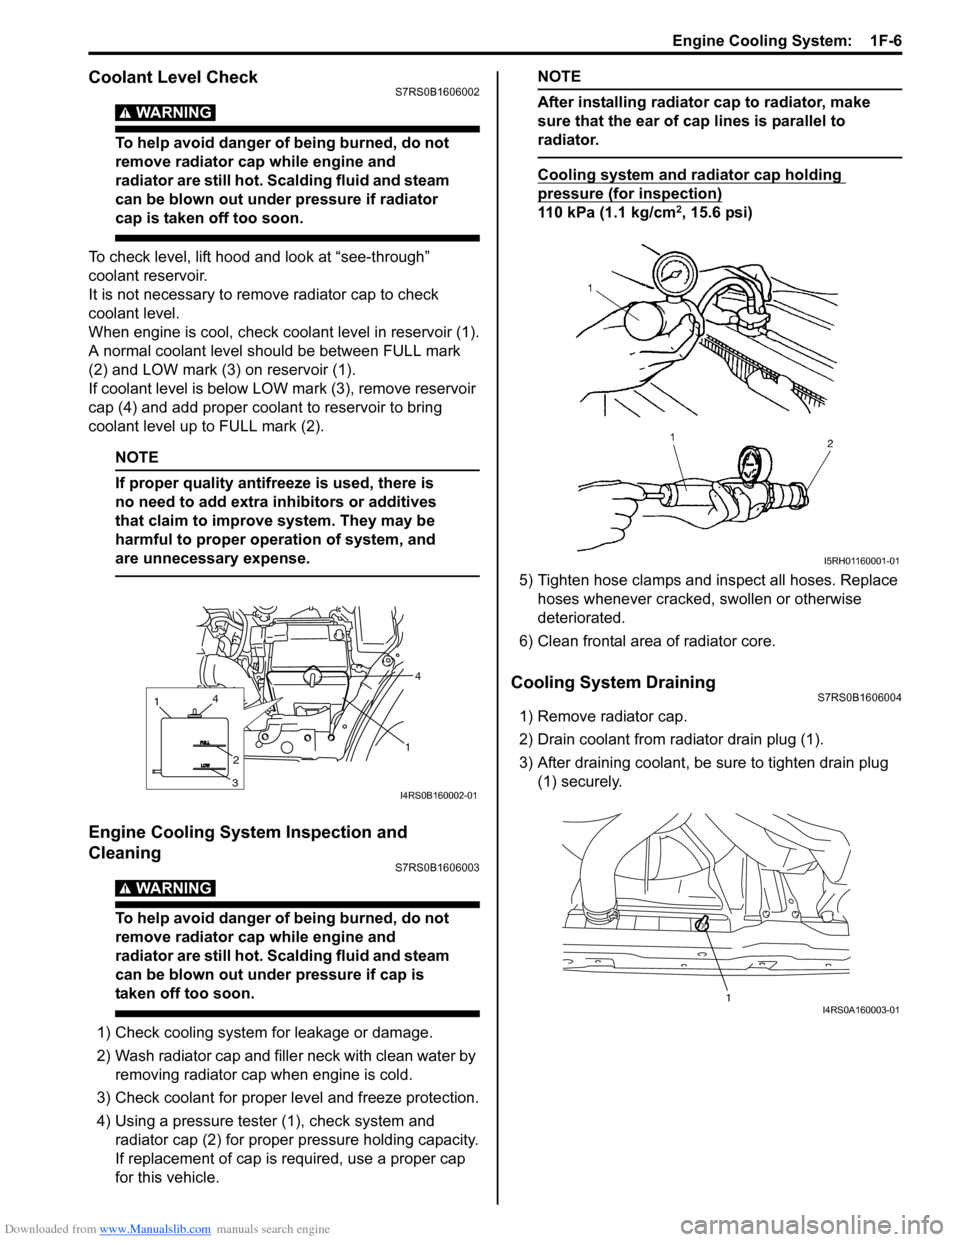 SUZUKI SWIFT 2006 2.G Service Owners Guide Downloaded from www.Manualslib.com manuals search engine Engine Cooling System:  1F-6
Coolant Level CheckS7RS0B1606002
WARNING! 
To help avoid danger of being burned, do not 
remove radiator cap while